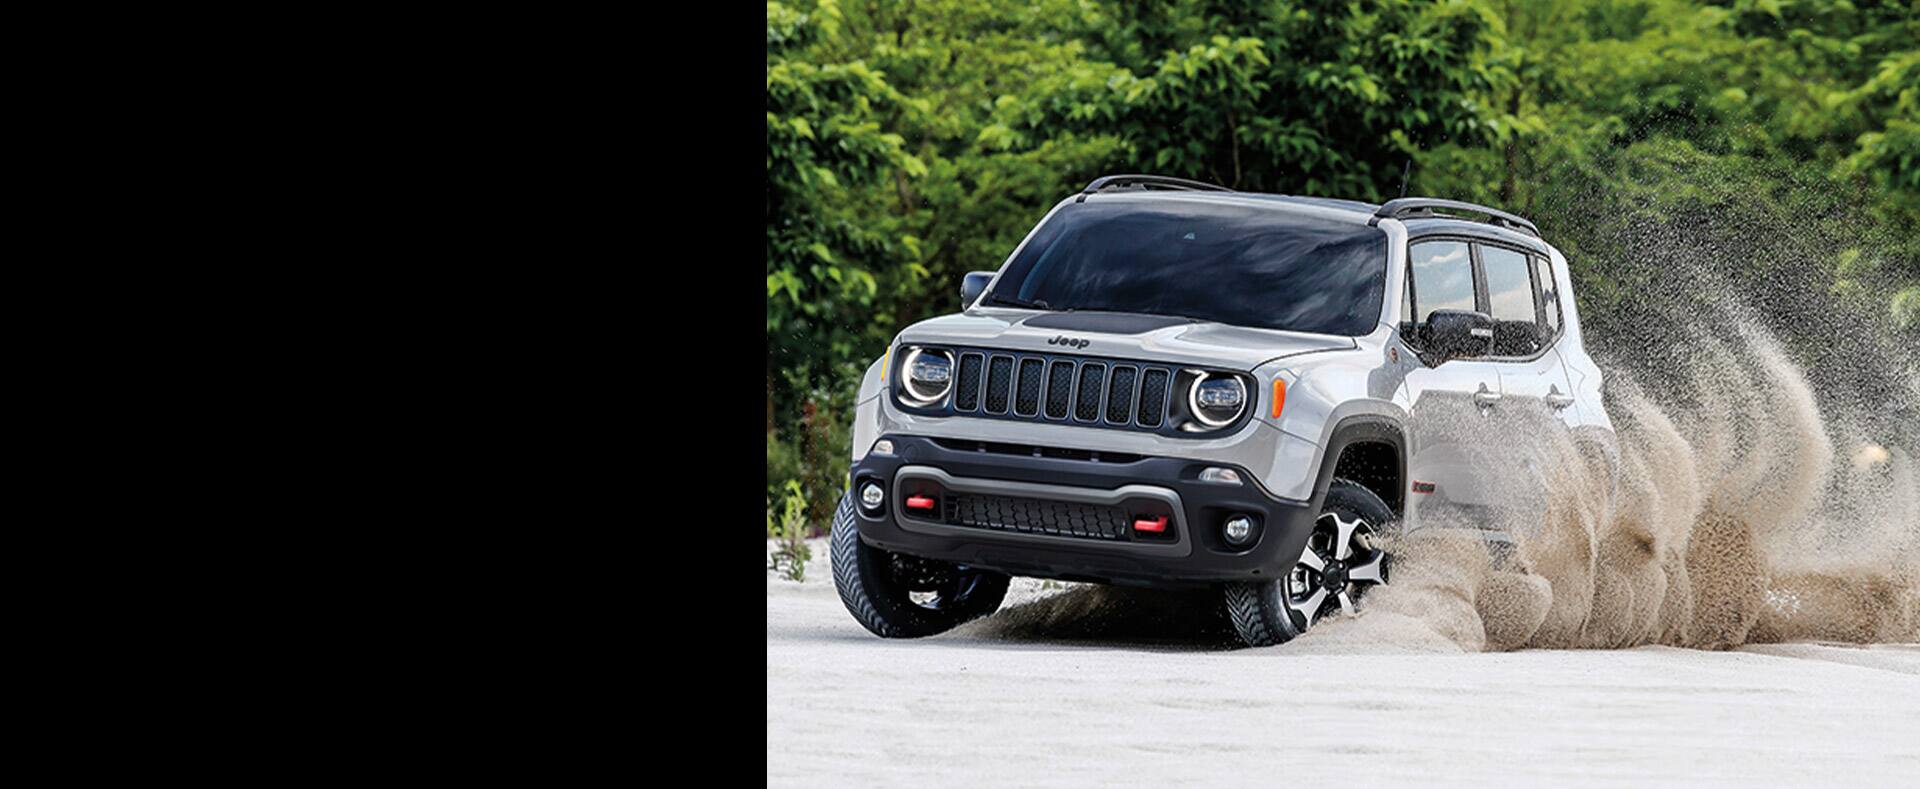 The wheels of 2021 Jeep Renegade throw up sand as it is driven on the beach.